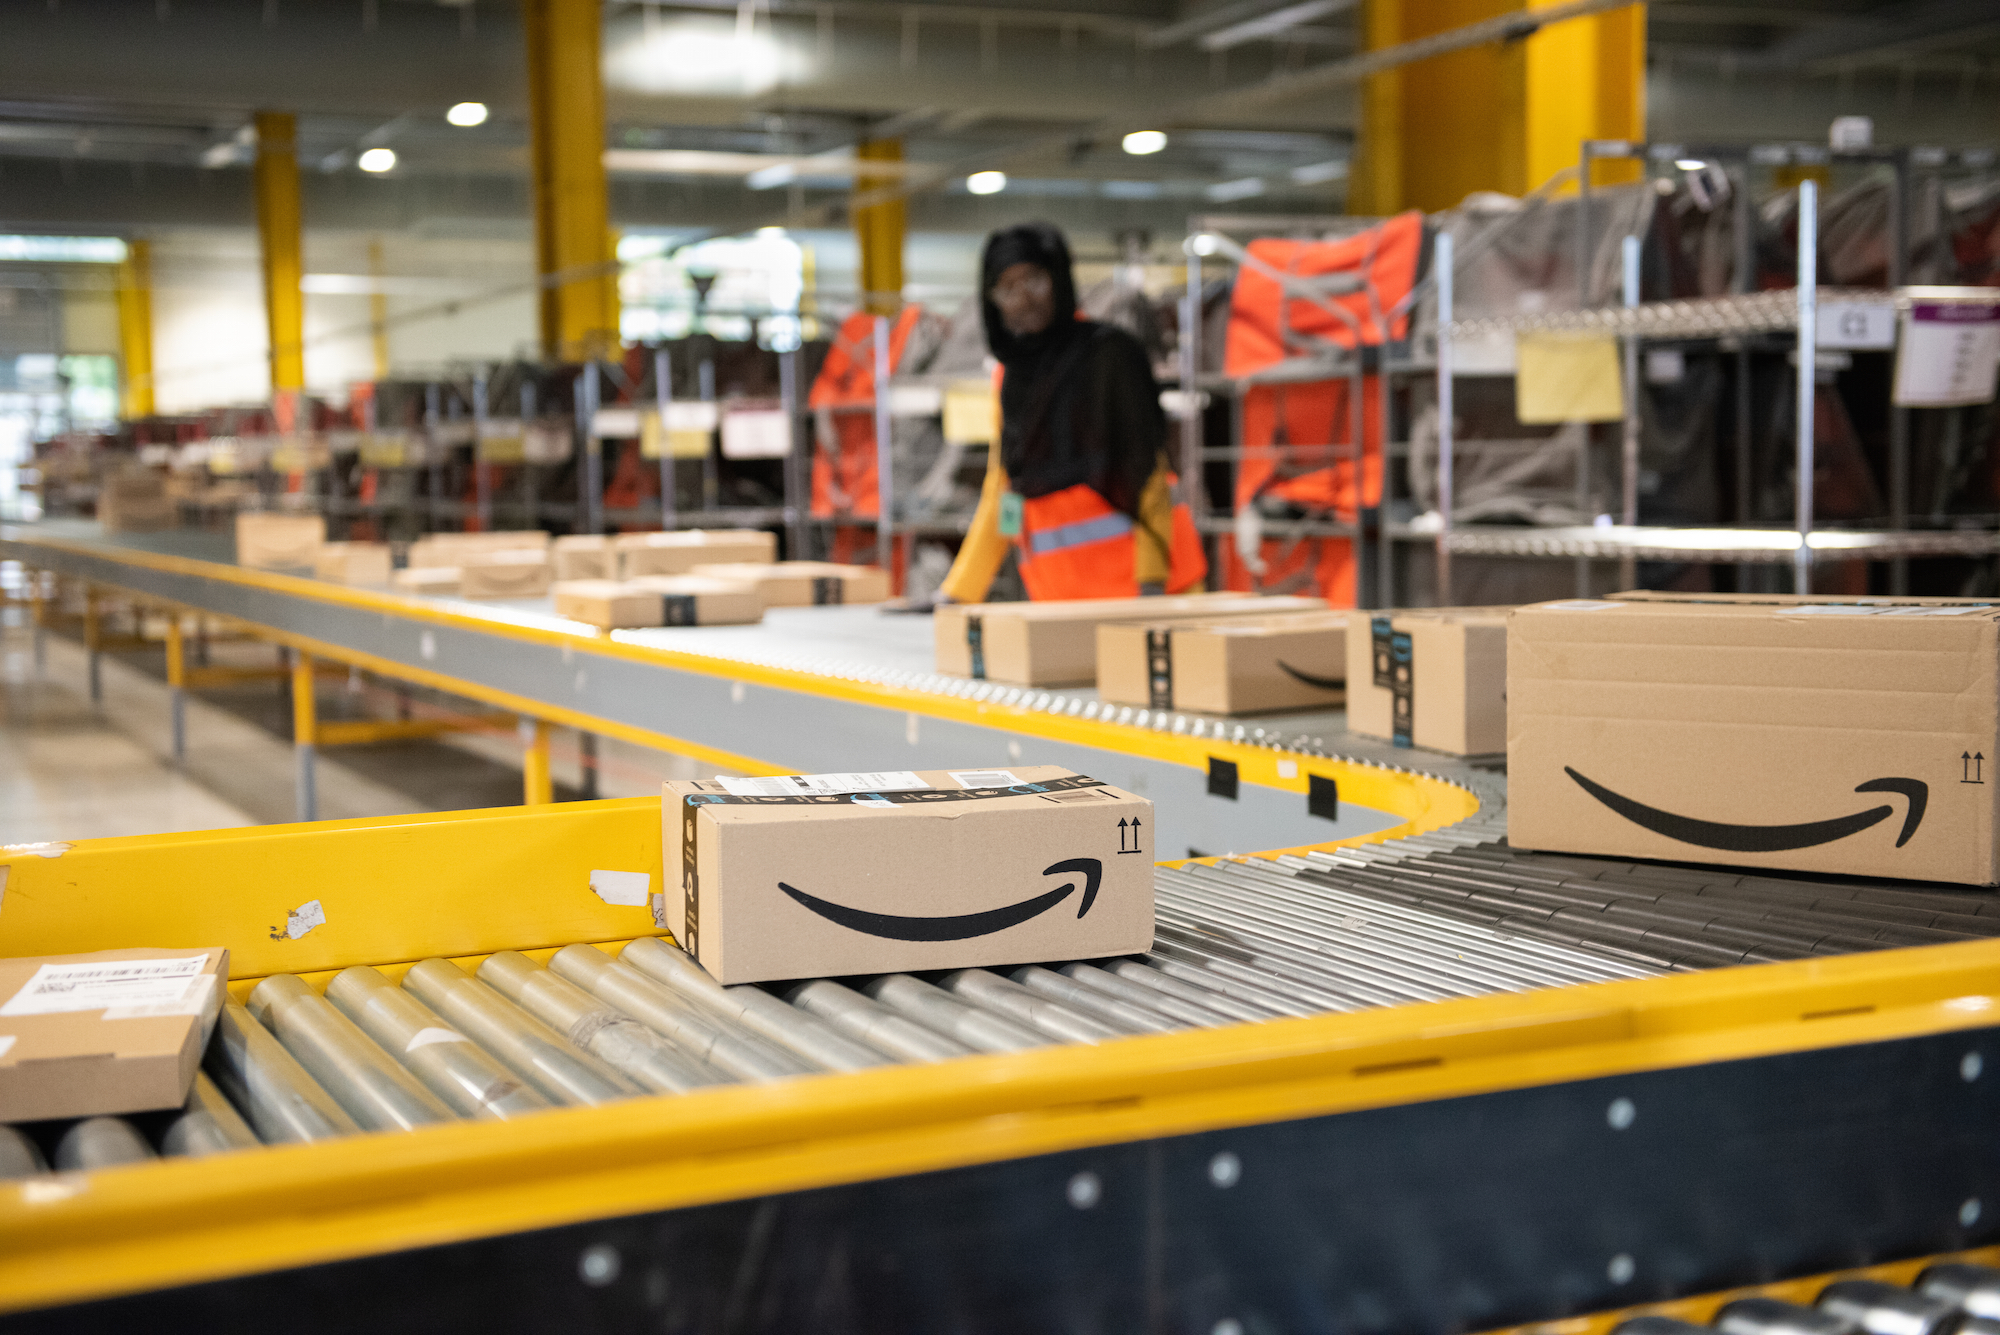 CWC Statement for Investors on the Union Election at Amazon's Facility in Bessemer, Alabama